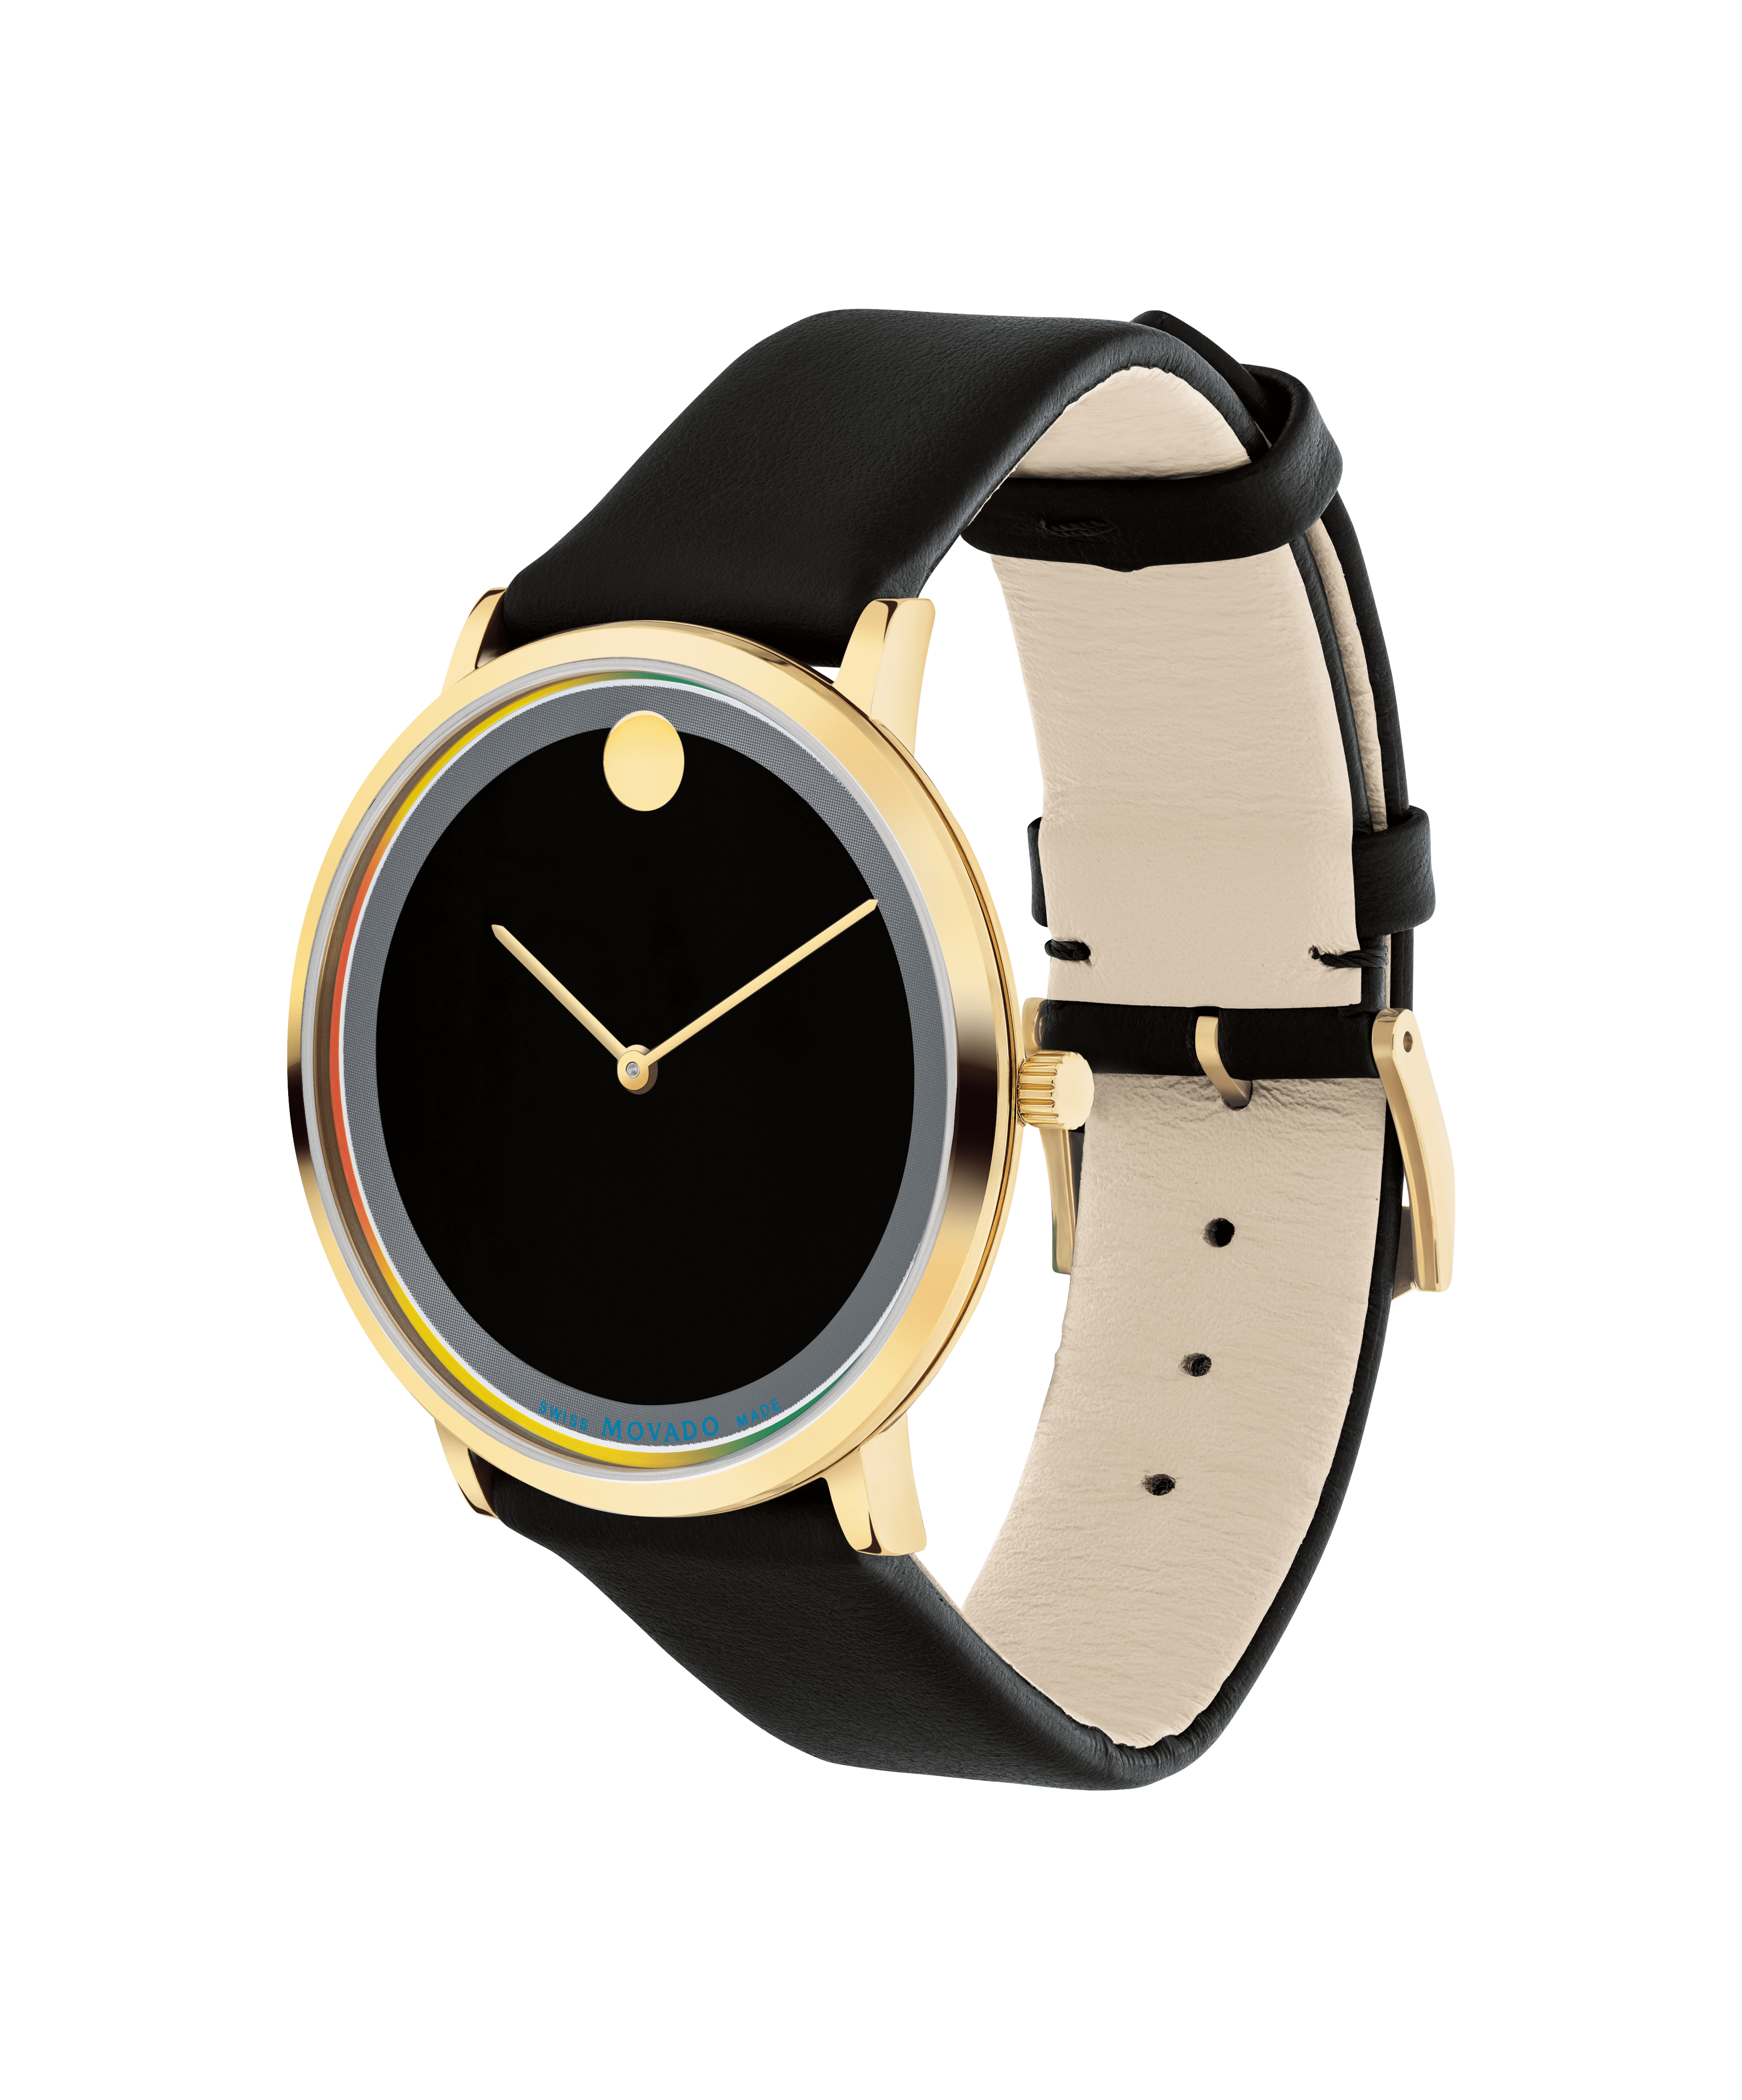 Movado Cerena Stainless Steel and Ceramic Ladies 0606539